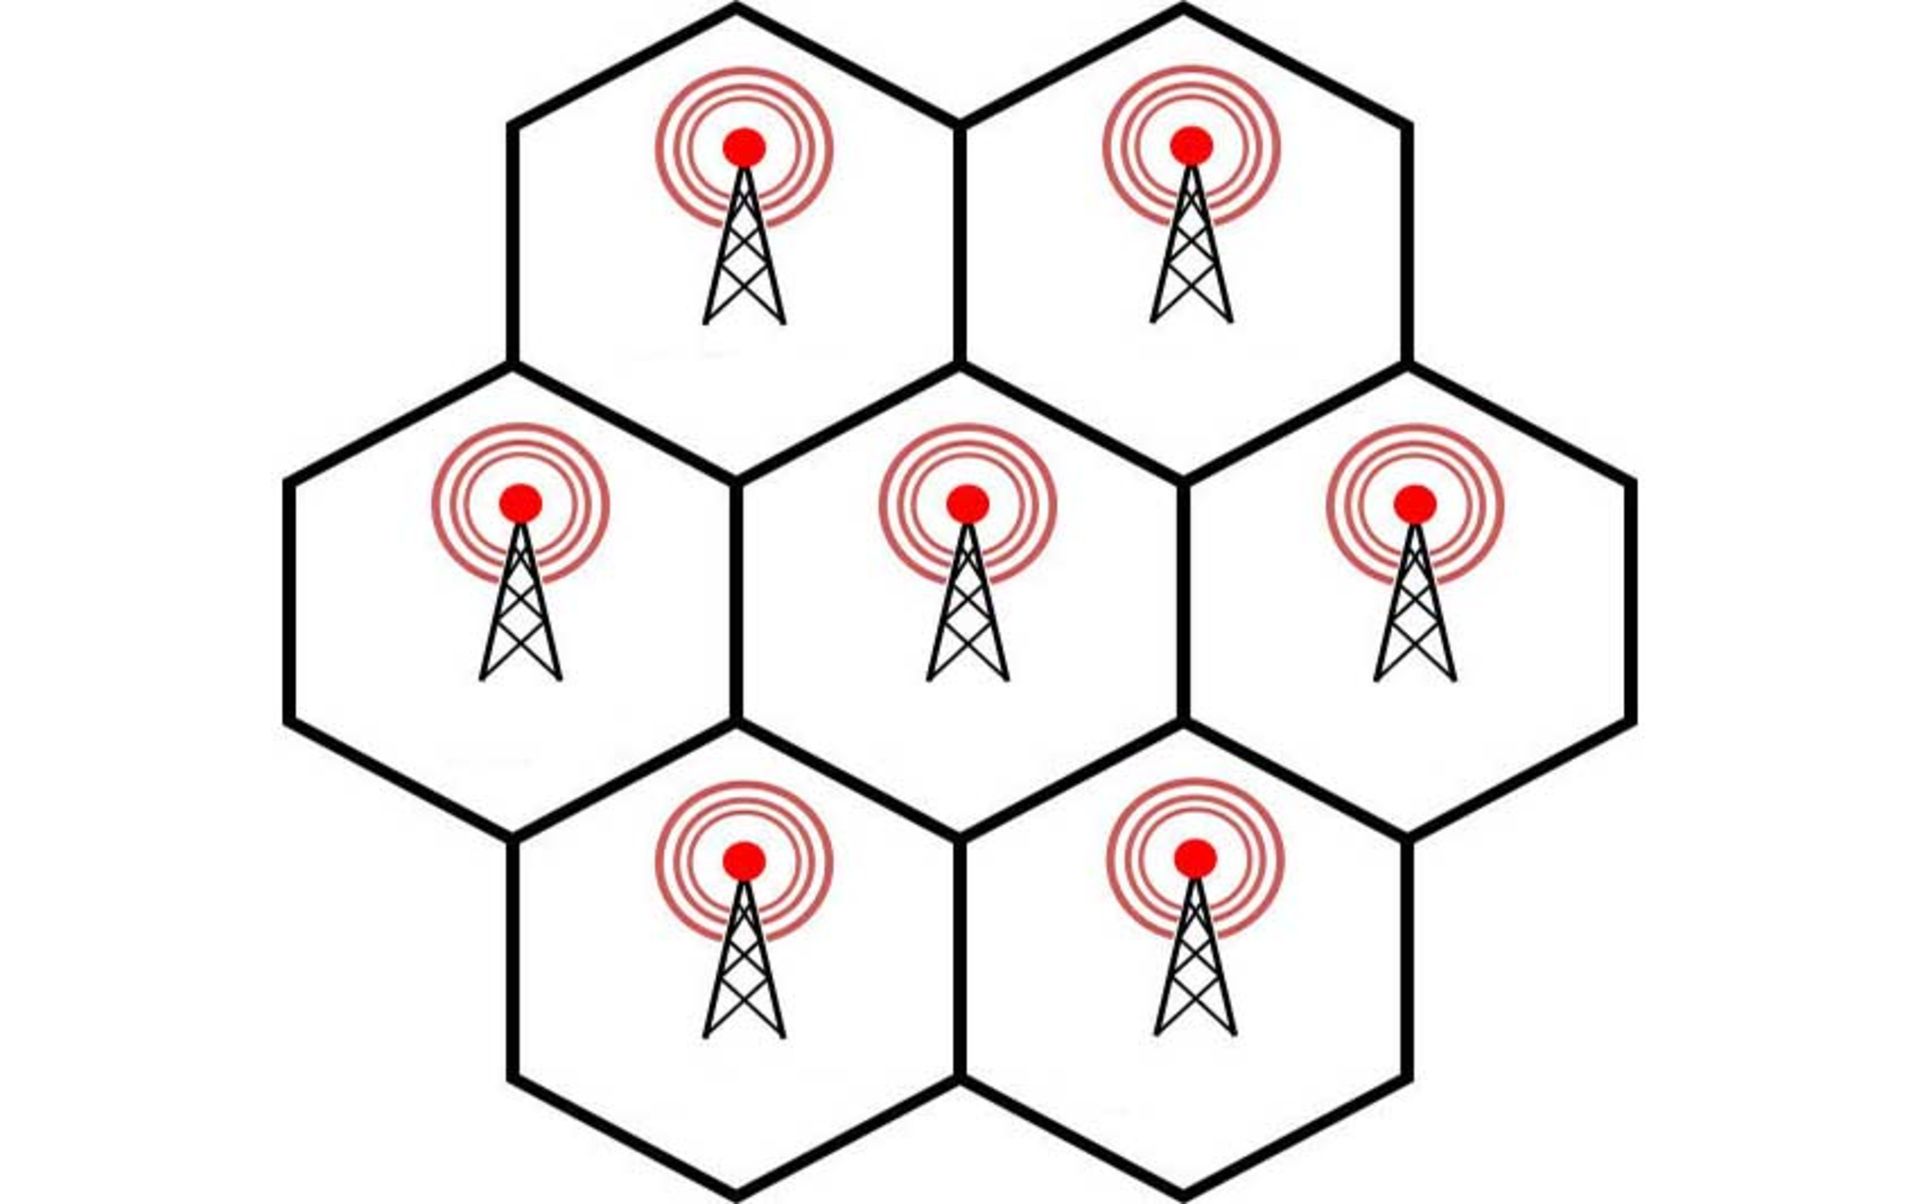 Hexagonal cells that are placed next to each other and cover the mobile network in a certain range.